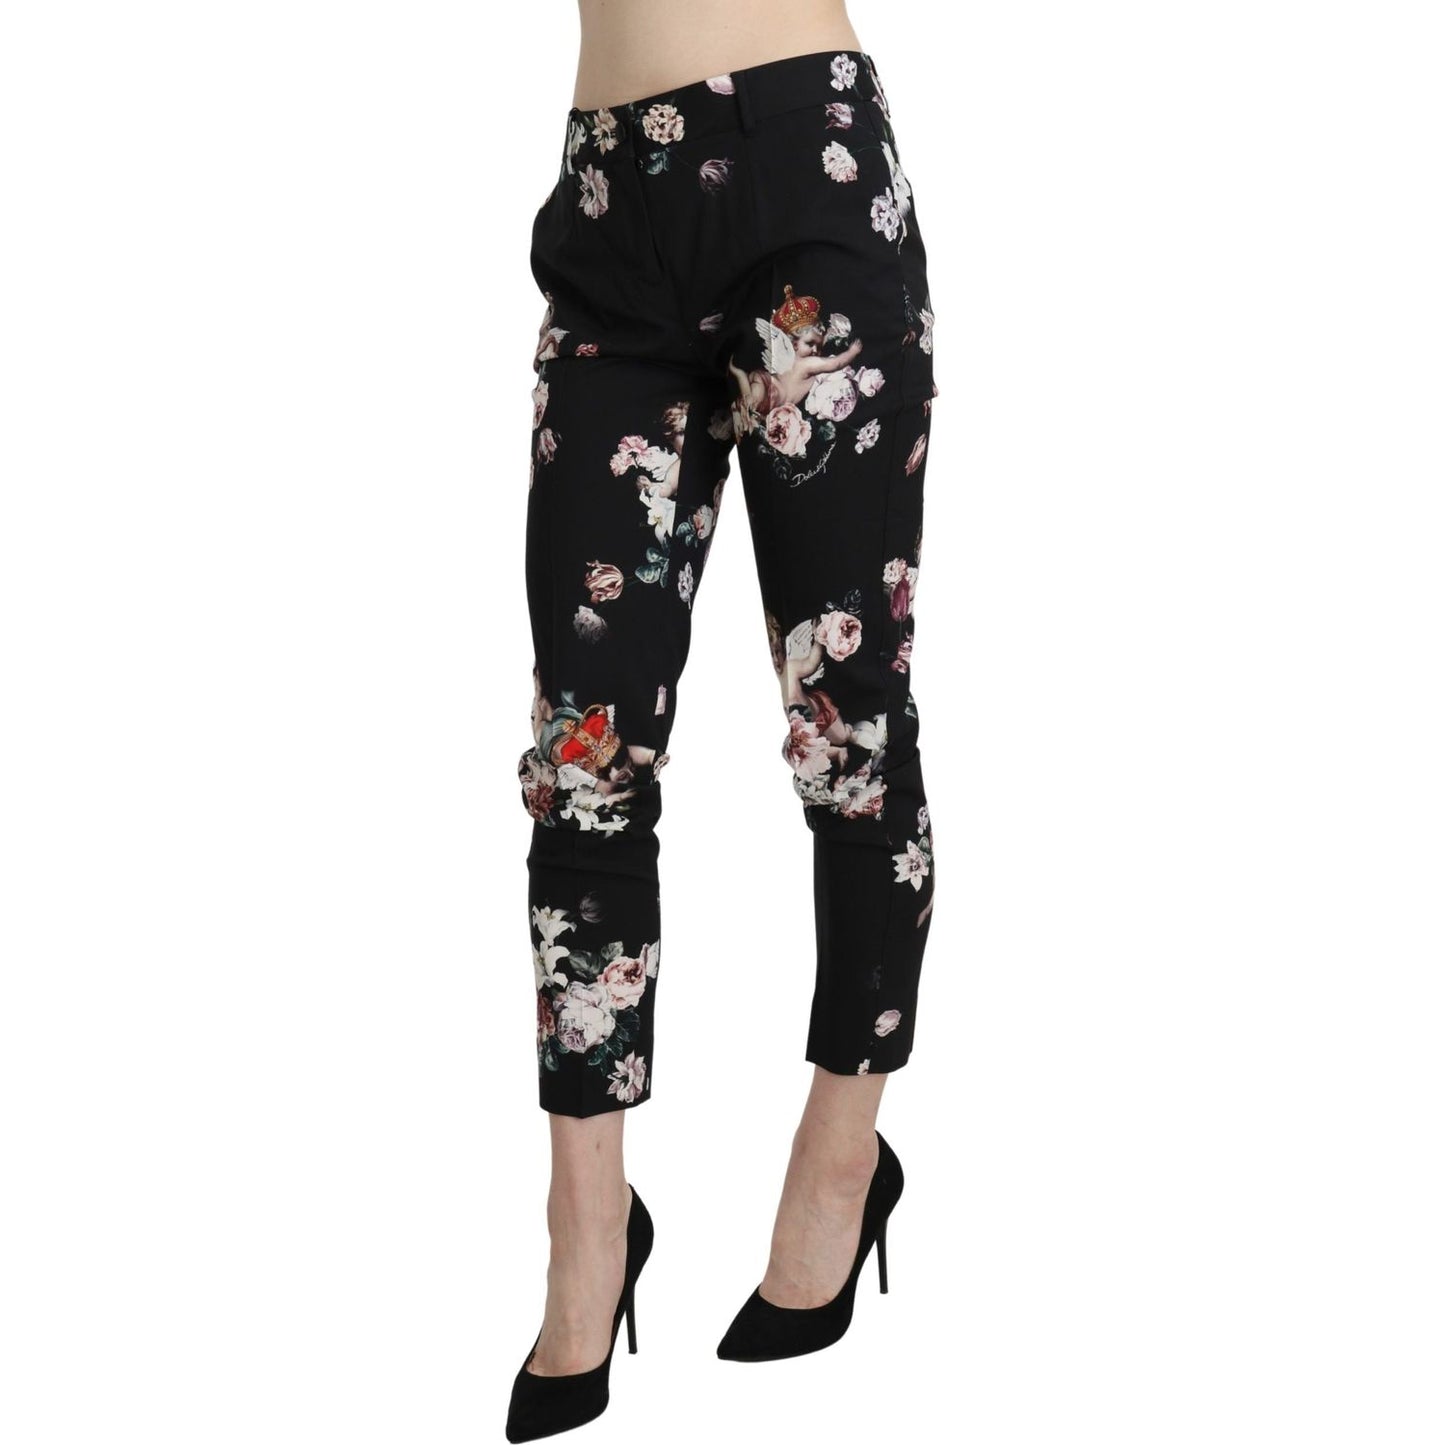 Dolce & Gabbana Elegant High Waist Cropped Trousers Jeans & Pants black-angel-floral-cropped-trouser-wool-pants IMG_0965-scaled-4094a594-b90.jpg